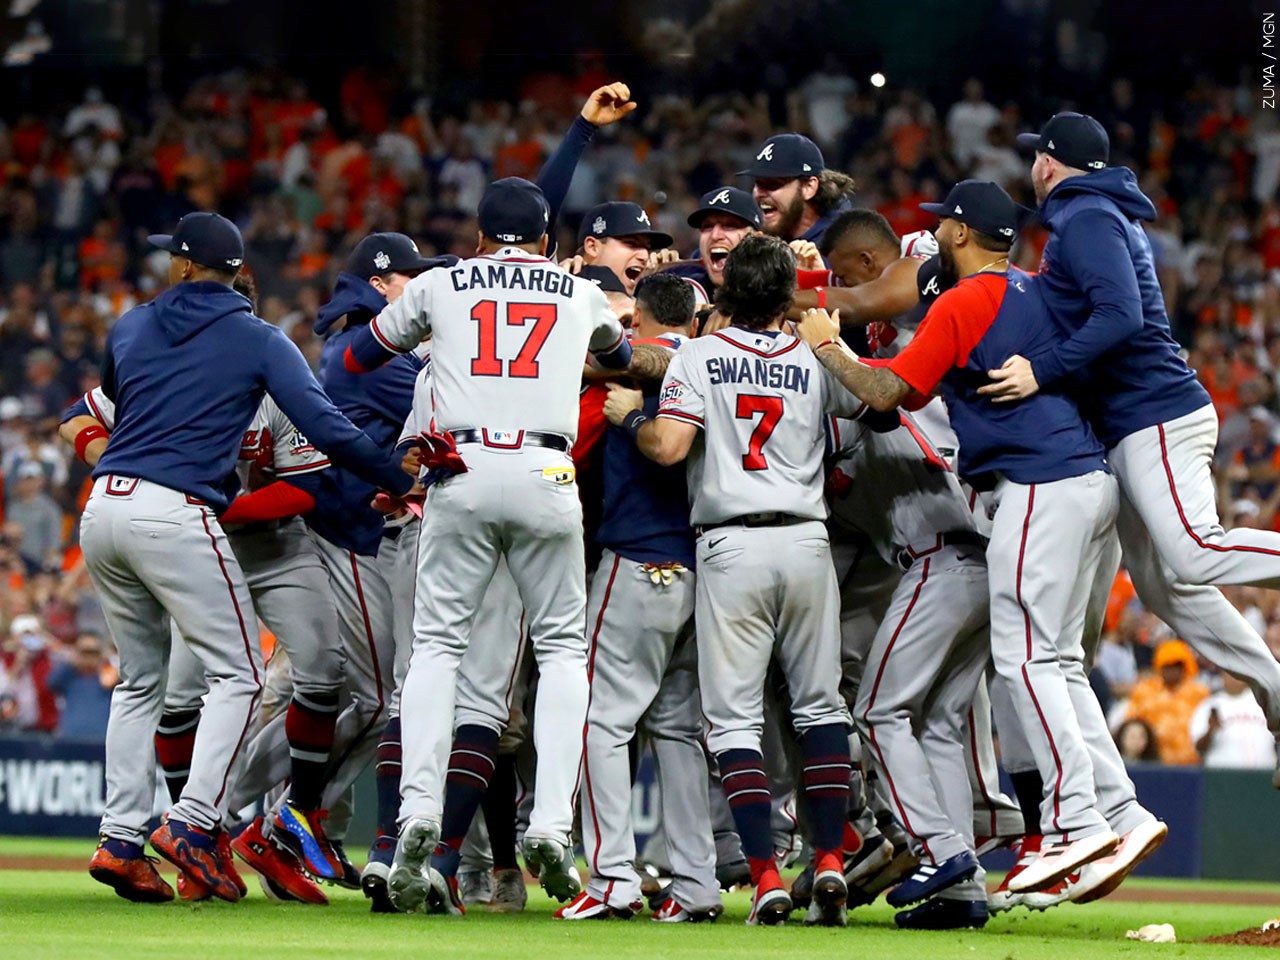 The Atlanta Braves claim first World Series title since 1995